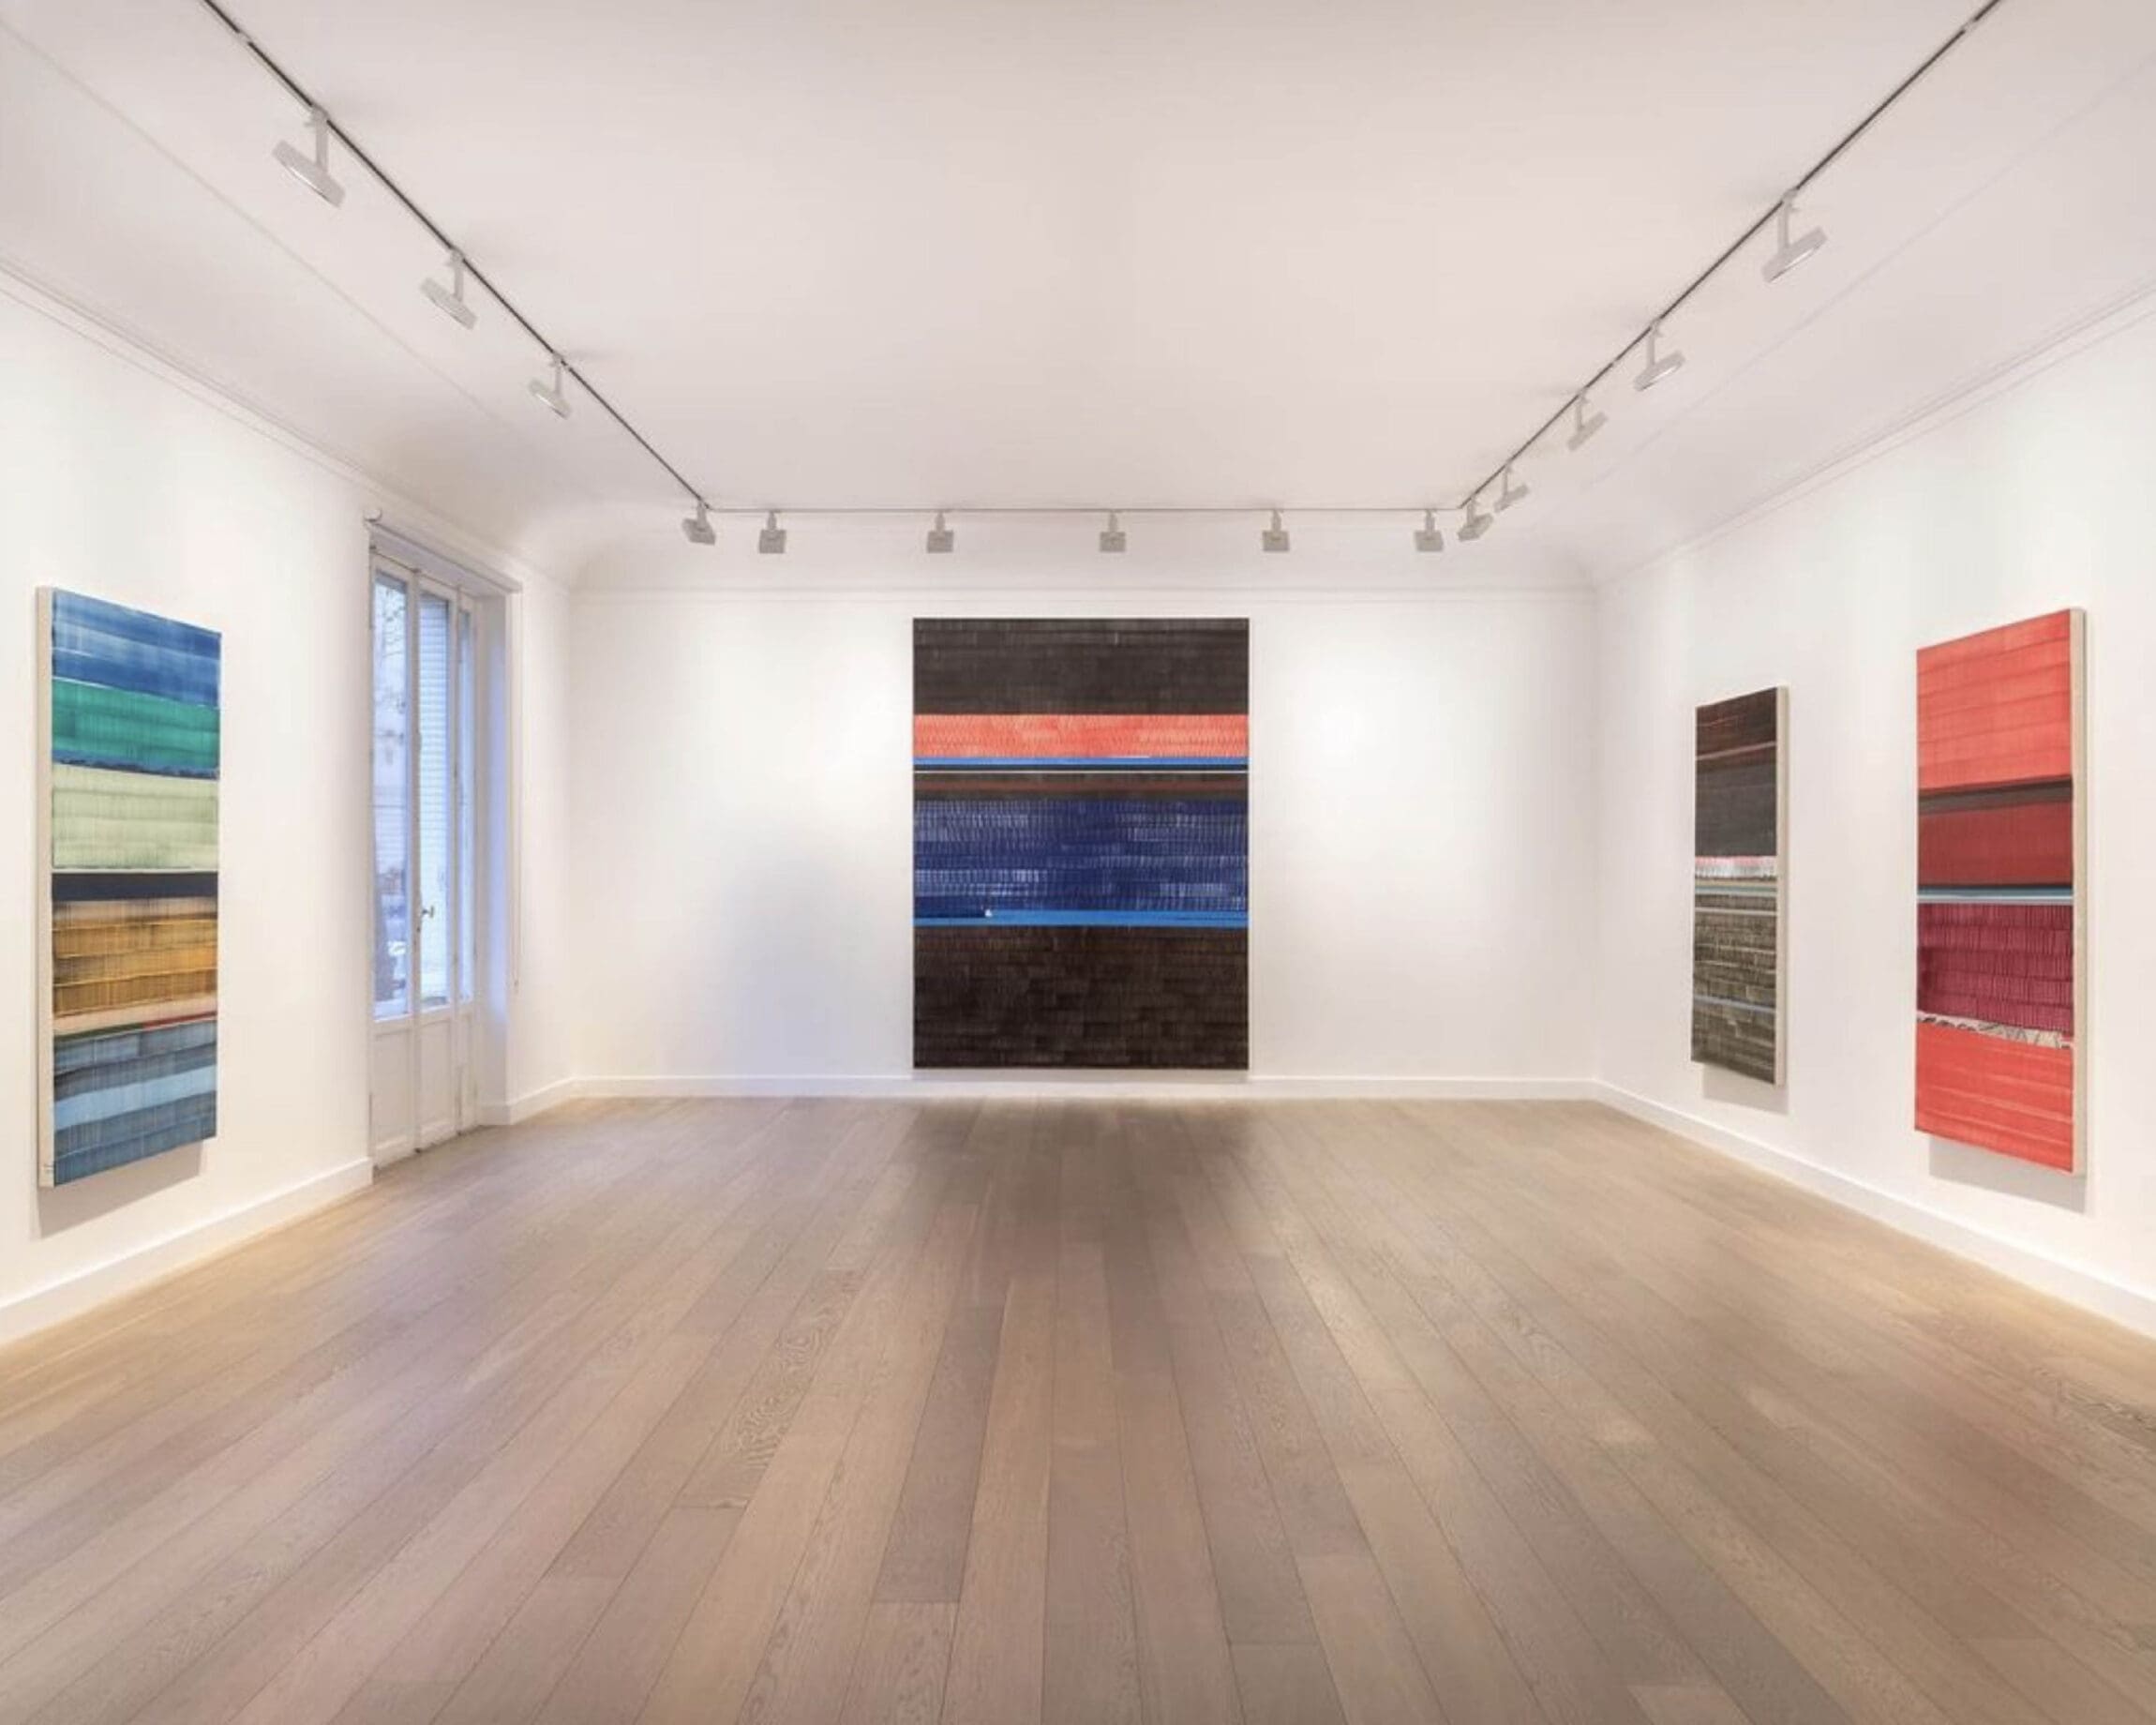 The best art galleries and museums in Paris | An installation view at Galerie Lelong